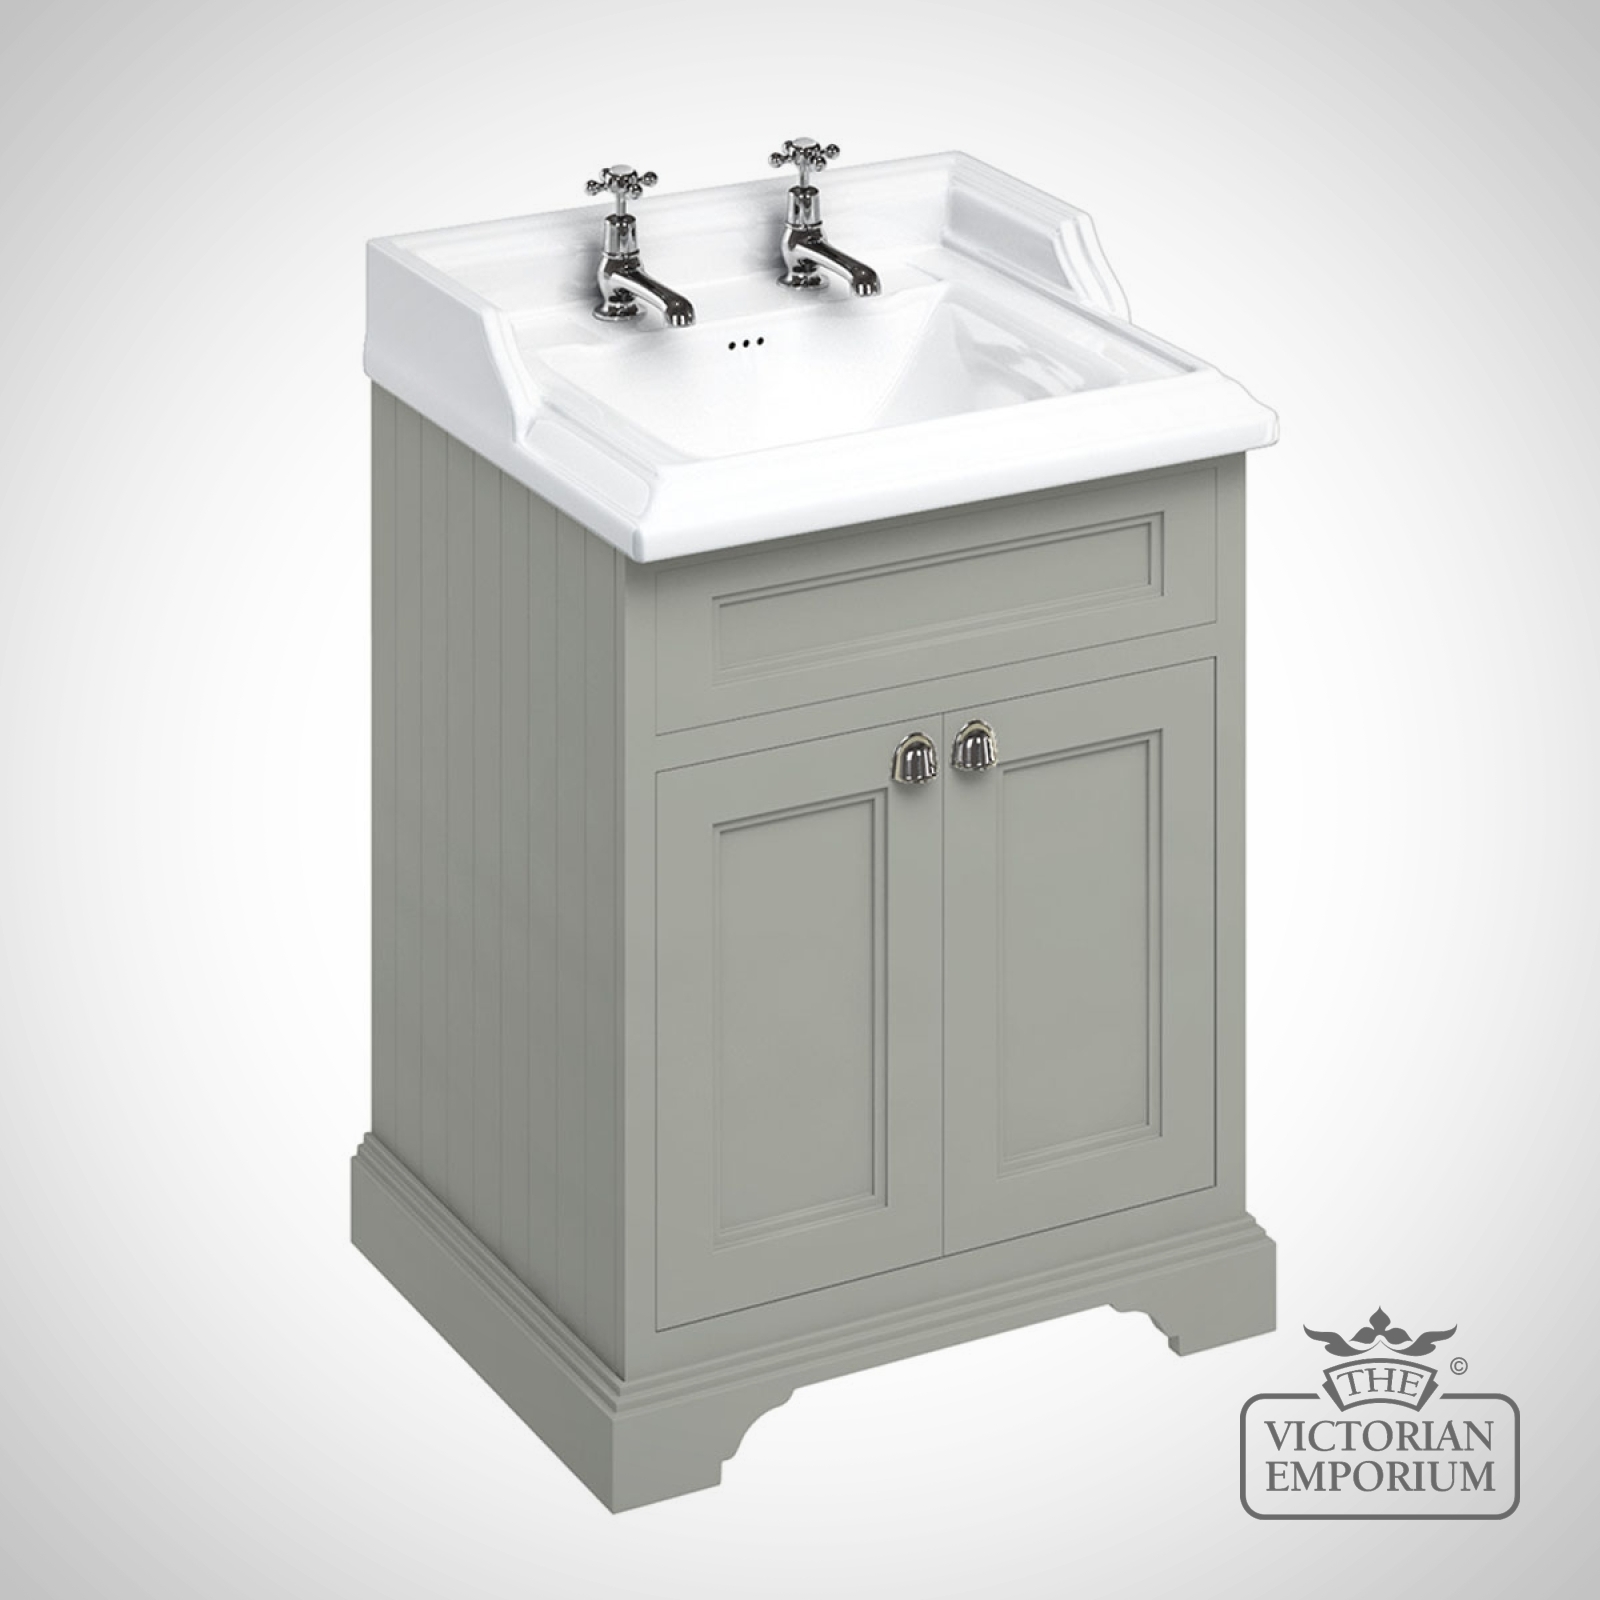 Freestanding 65cm wide Vanity Unit with double doors and classic basin